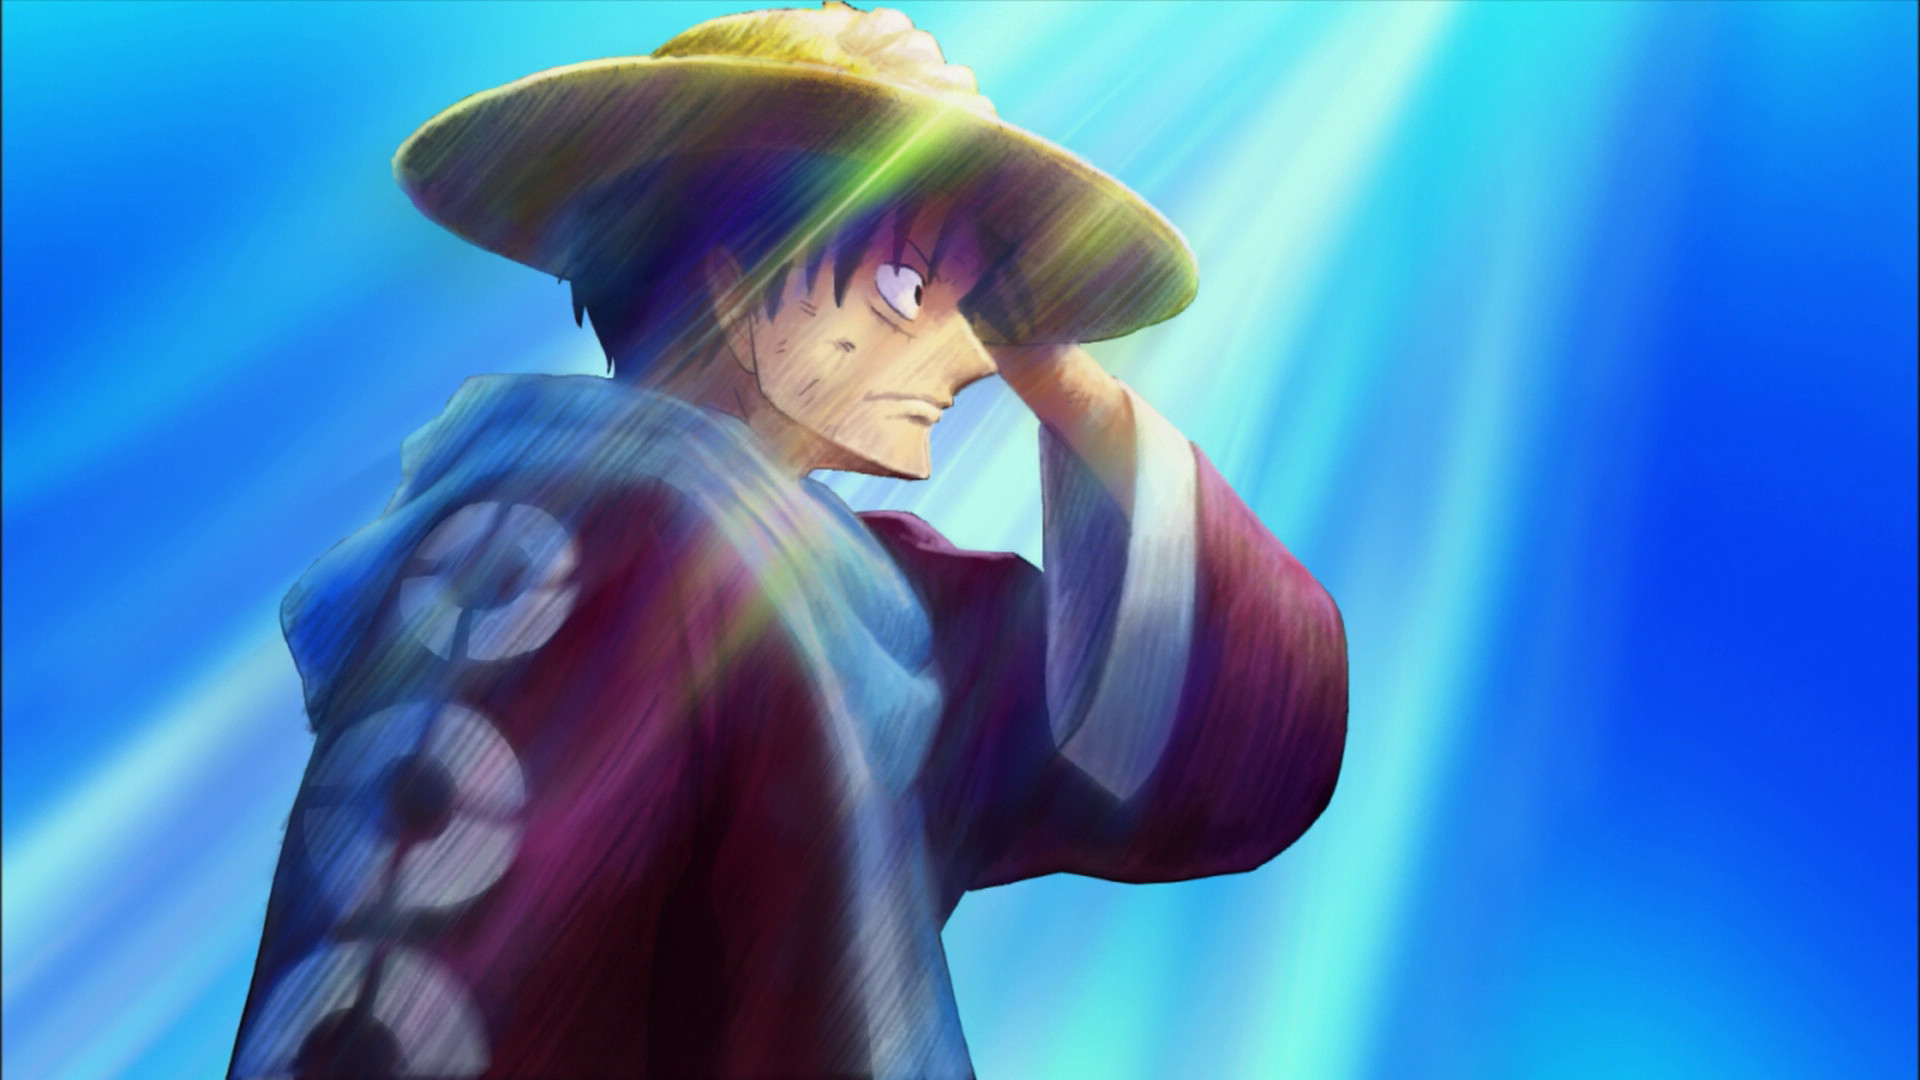 One Piece Wallpaper Luffy (64+ Images)